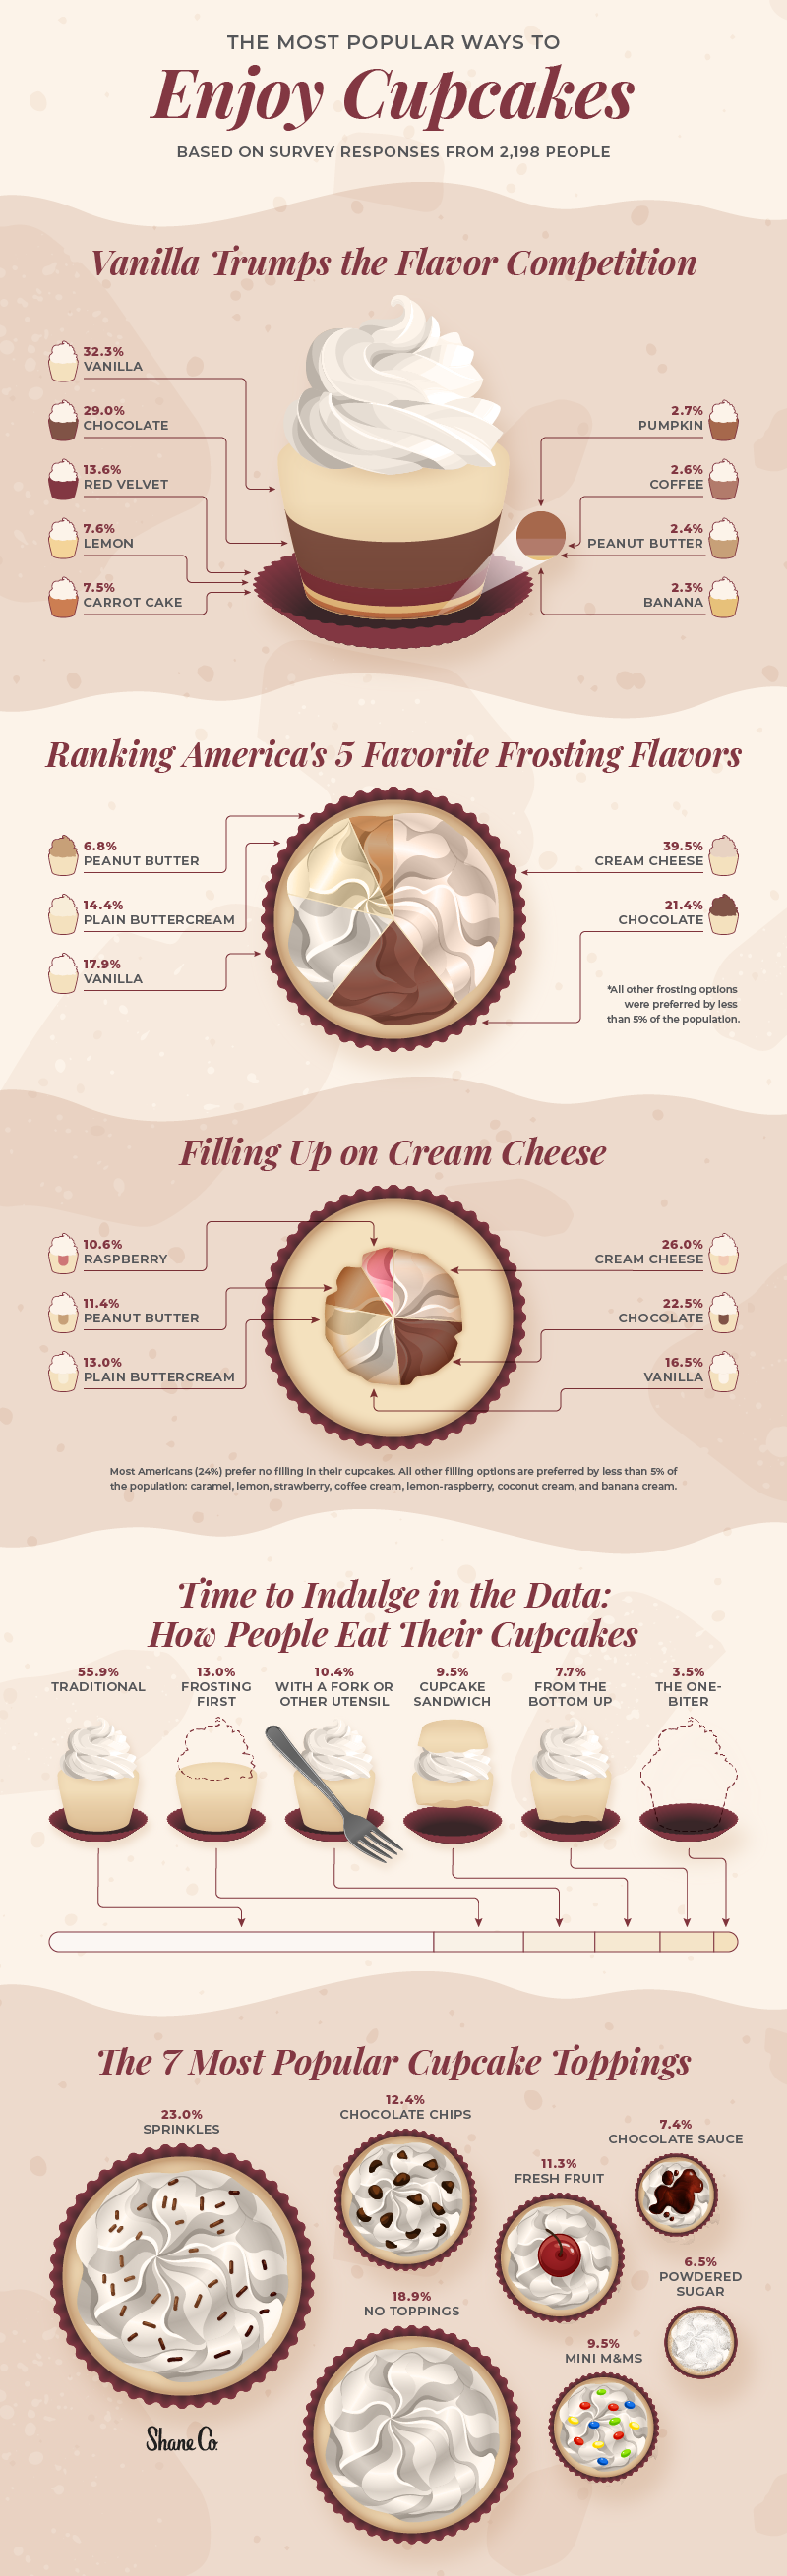 A graphic shows the preferences most Americans have when it comes to eating cupcakes.